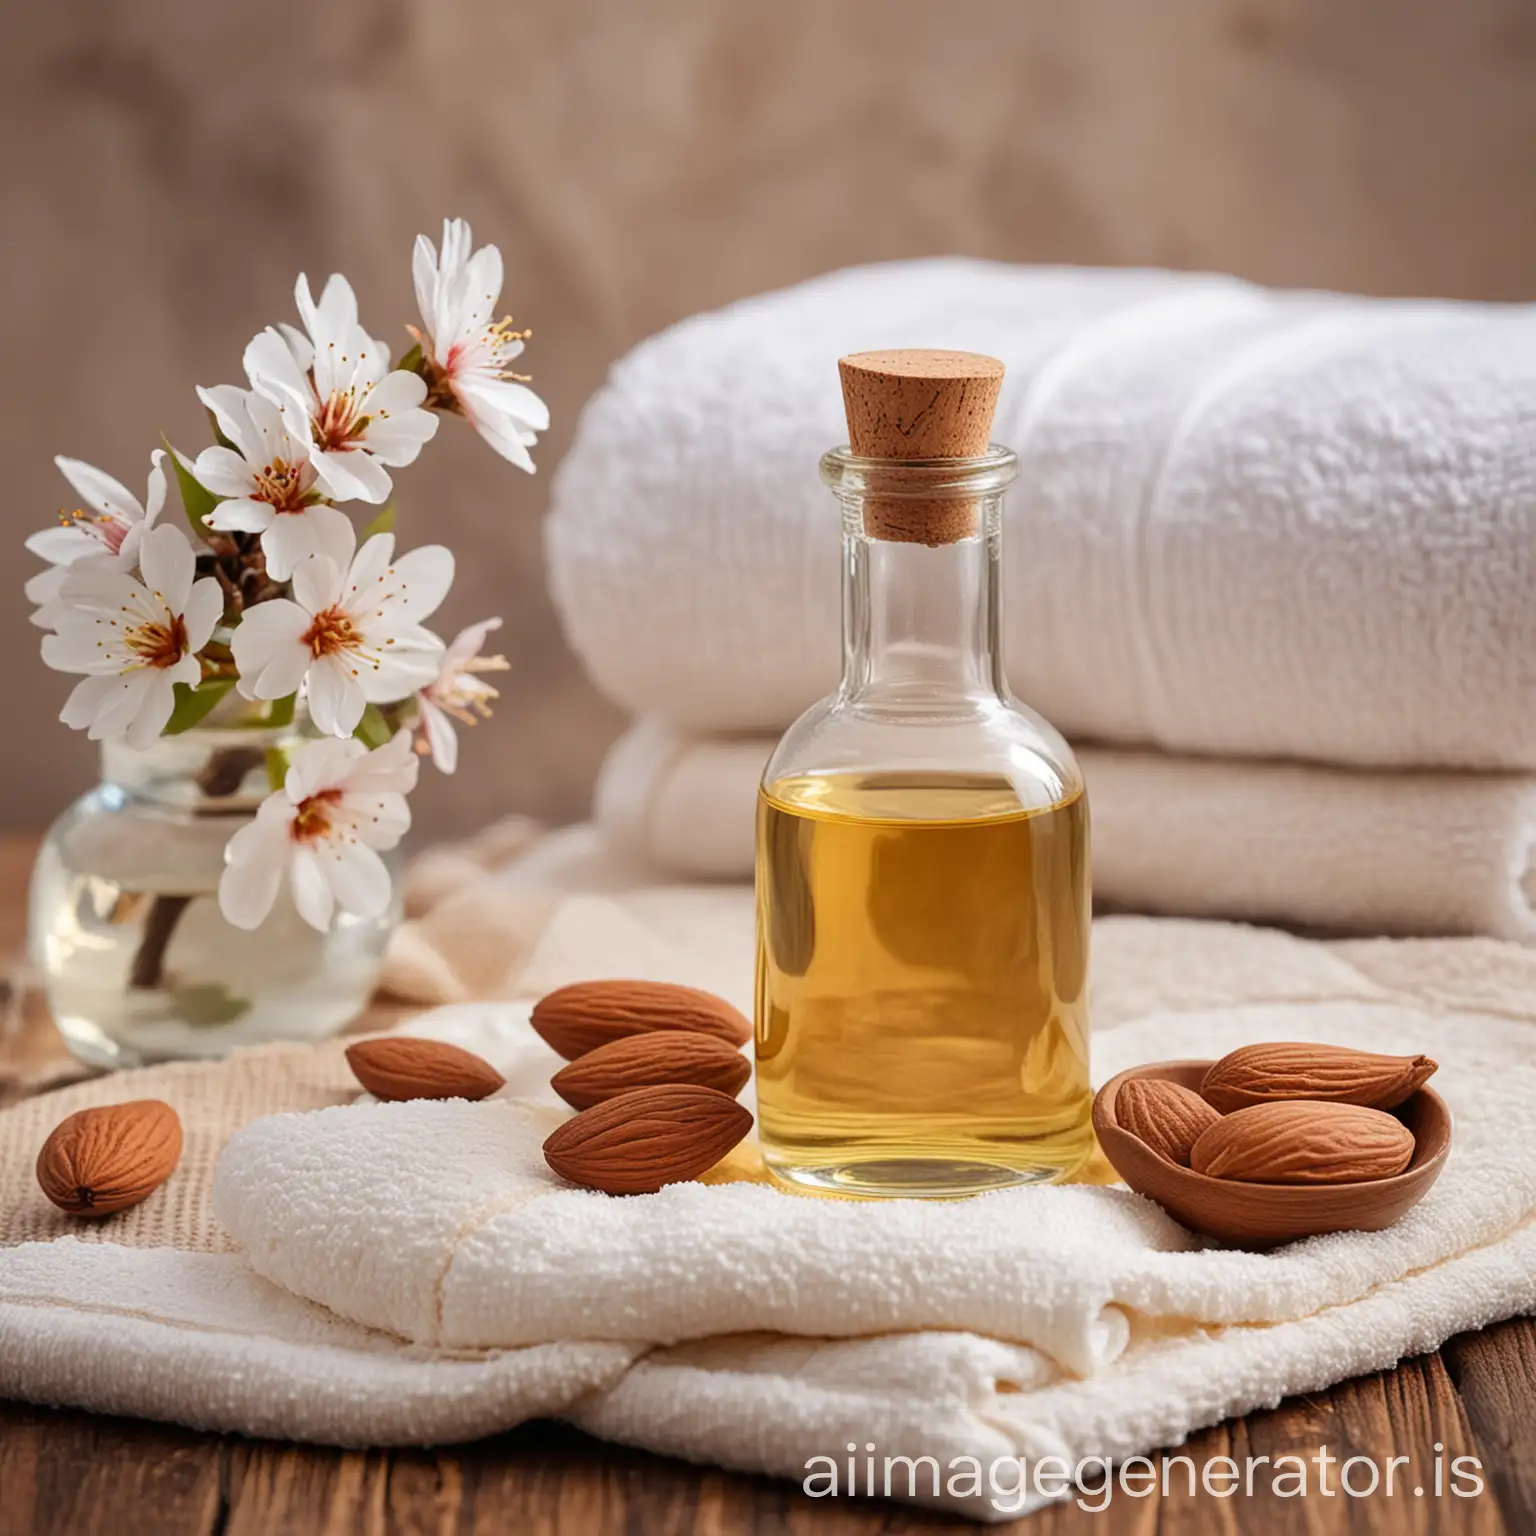 almond oil for massage in the foreground.  BACKGROUND is spa kind of setting for kids with towels and almond blossoms.